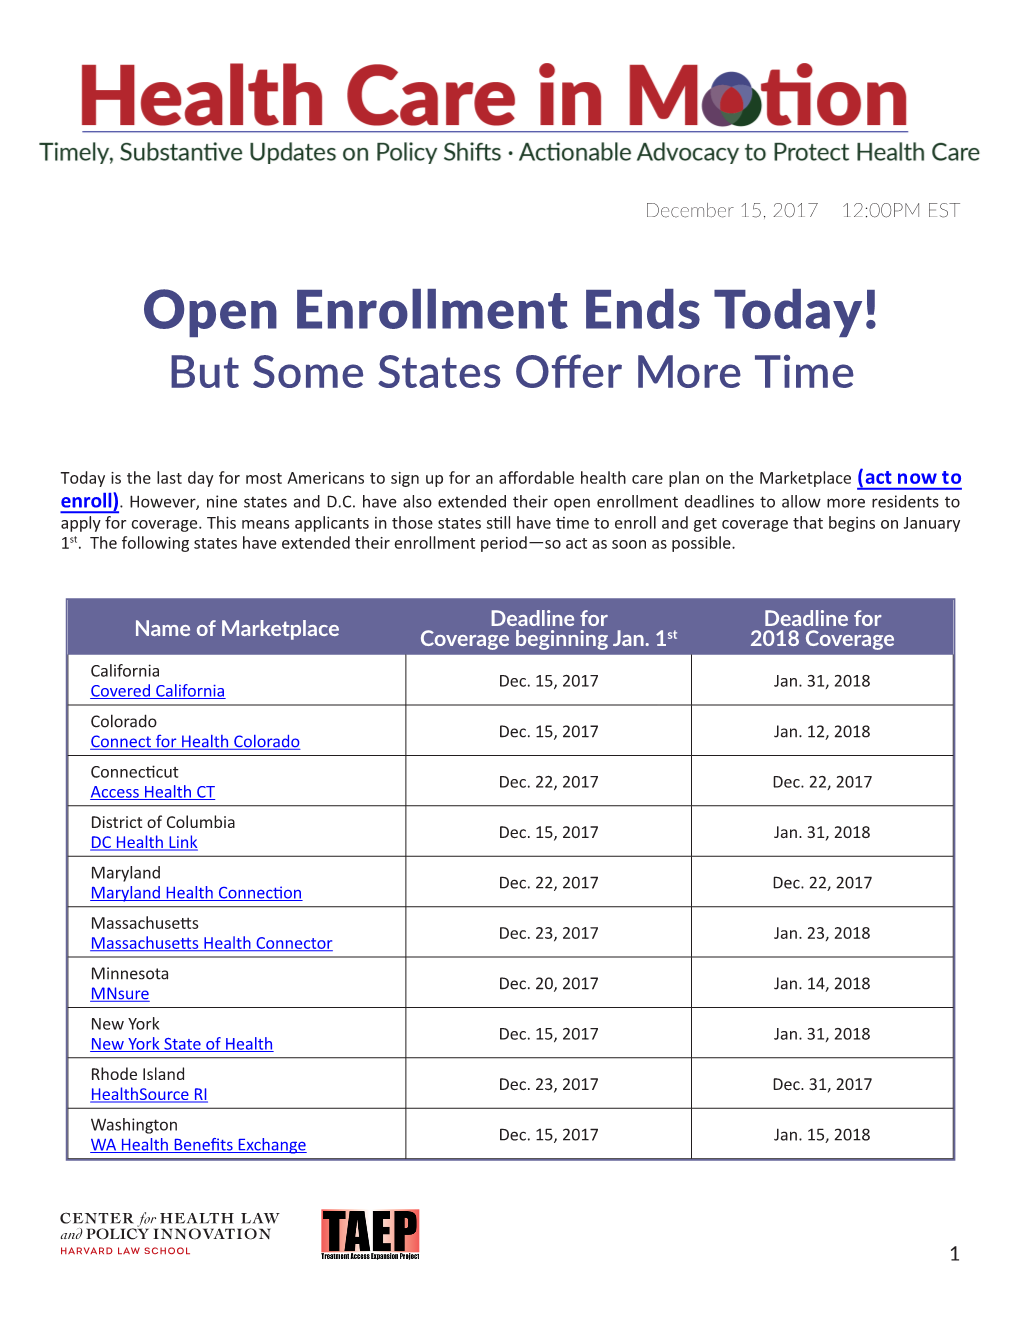 Open Enrollment Ends Today! but Some States Offer More Time